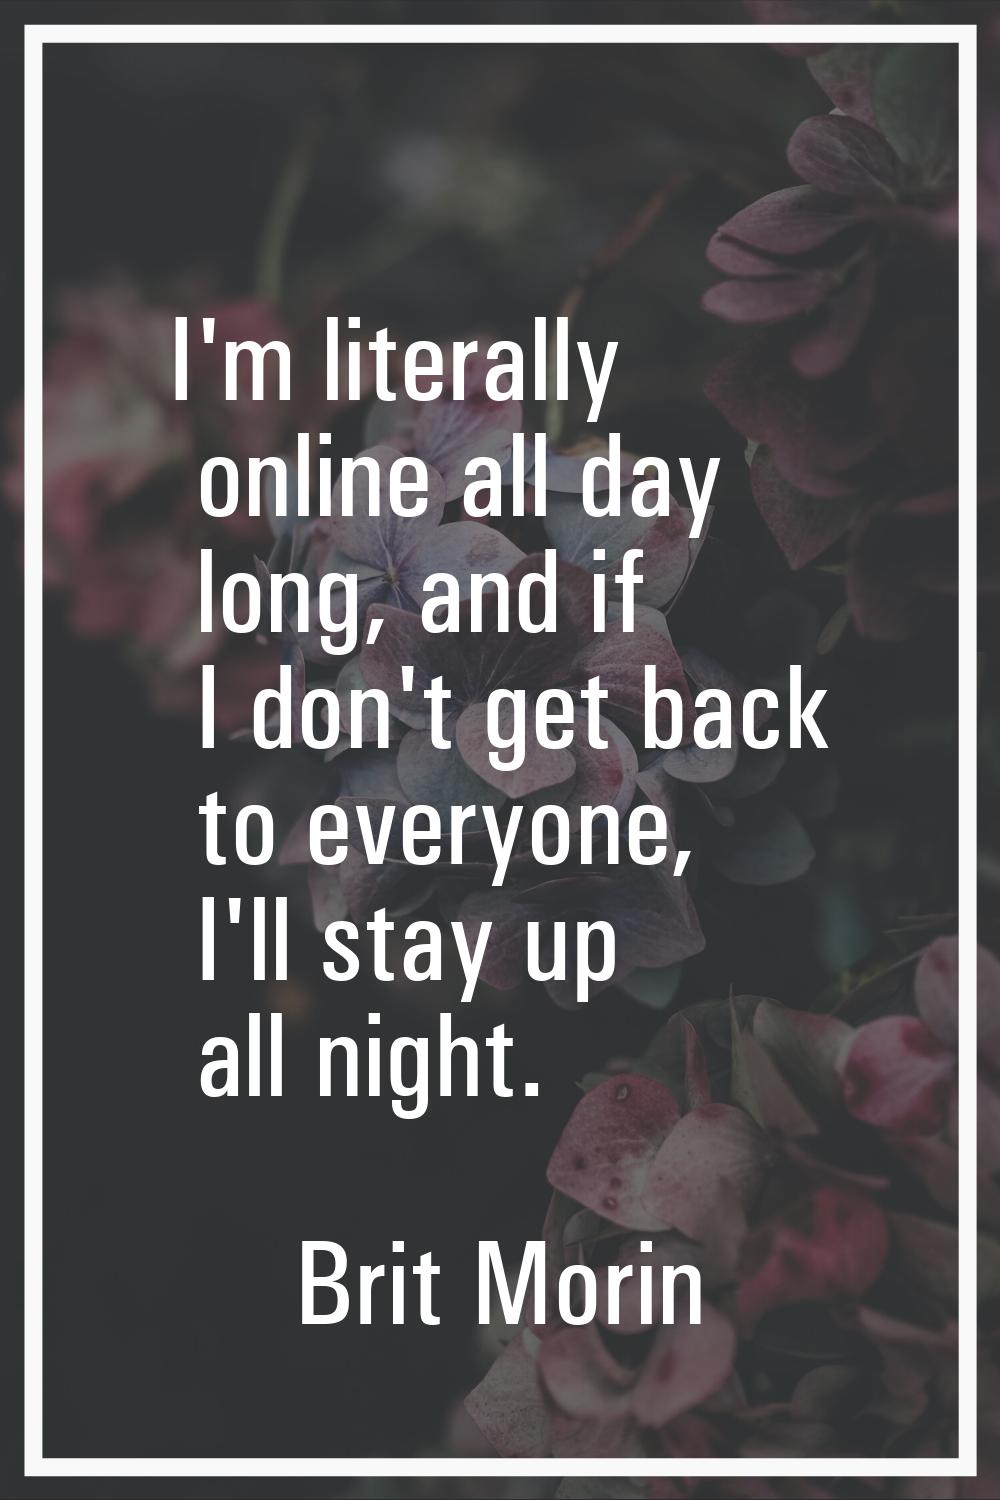 I'm literally online all day long, and if I don't get back to everyone, I'll stay up all night.